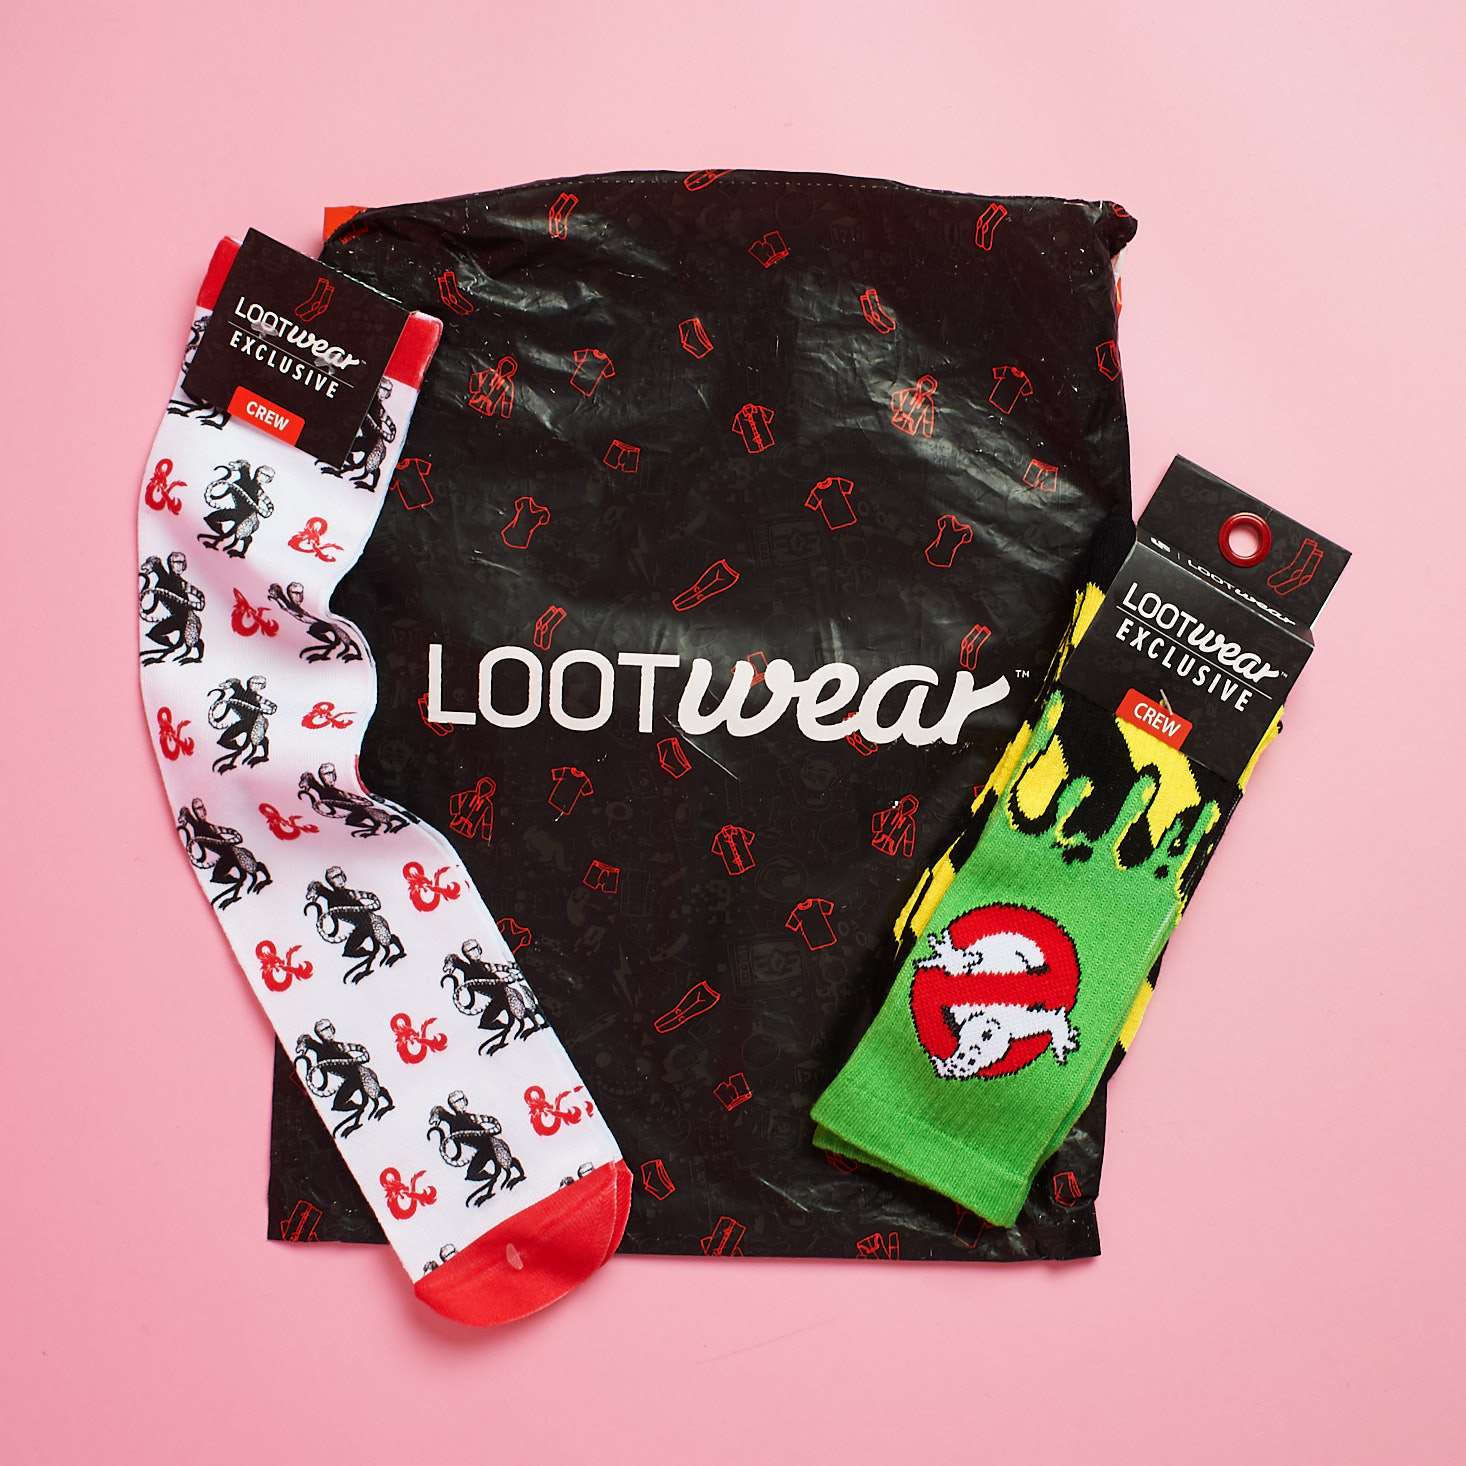 Loot Socks Subscription by Loot Crate Review + Coupon – October 2017